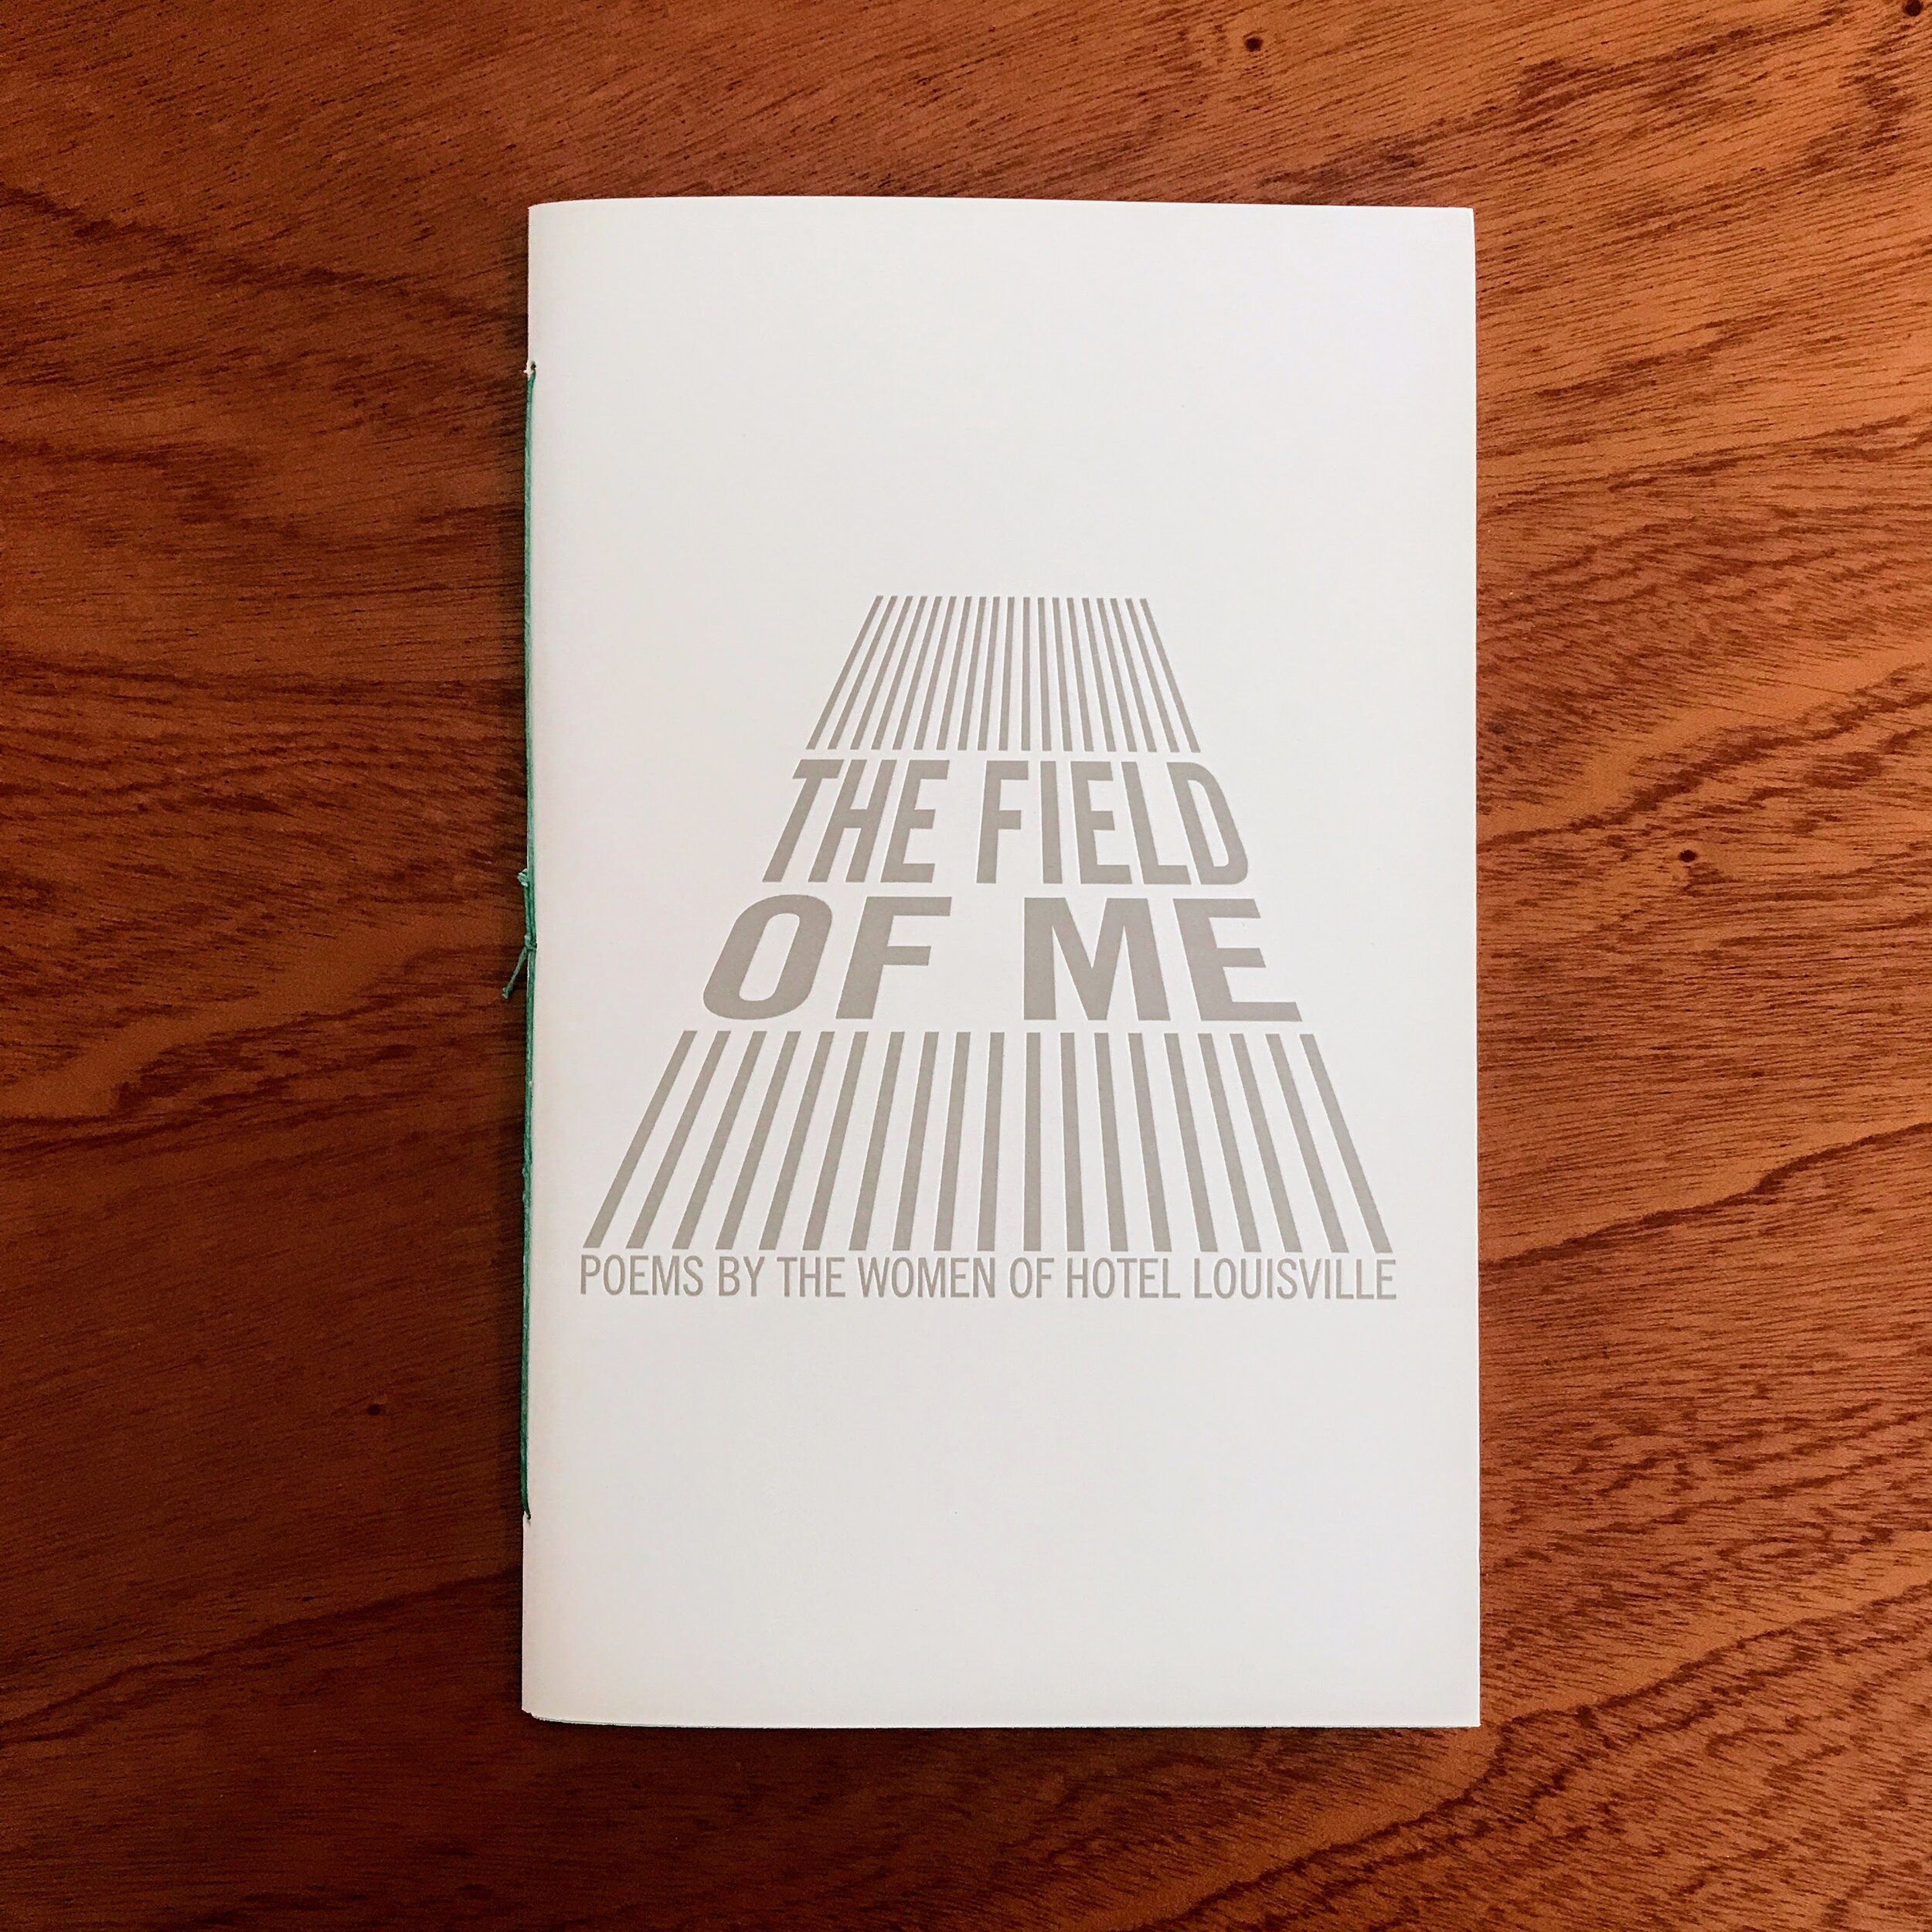 VOL. 2, THE FIELD OF ME